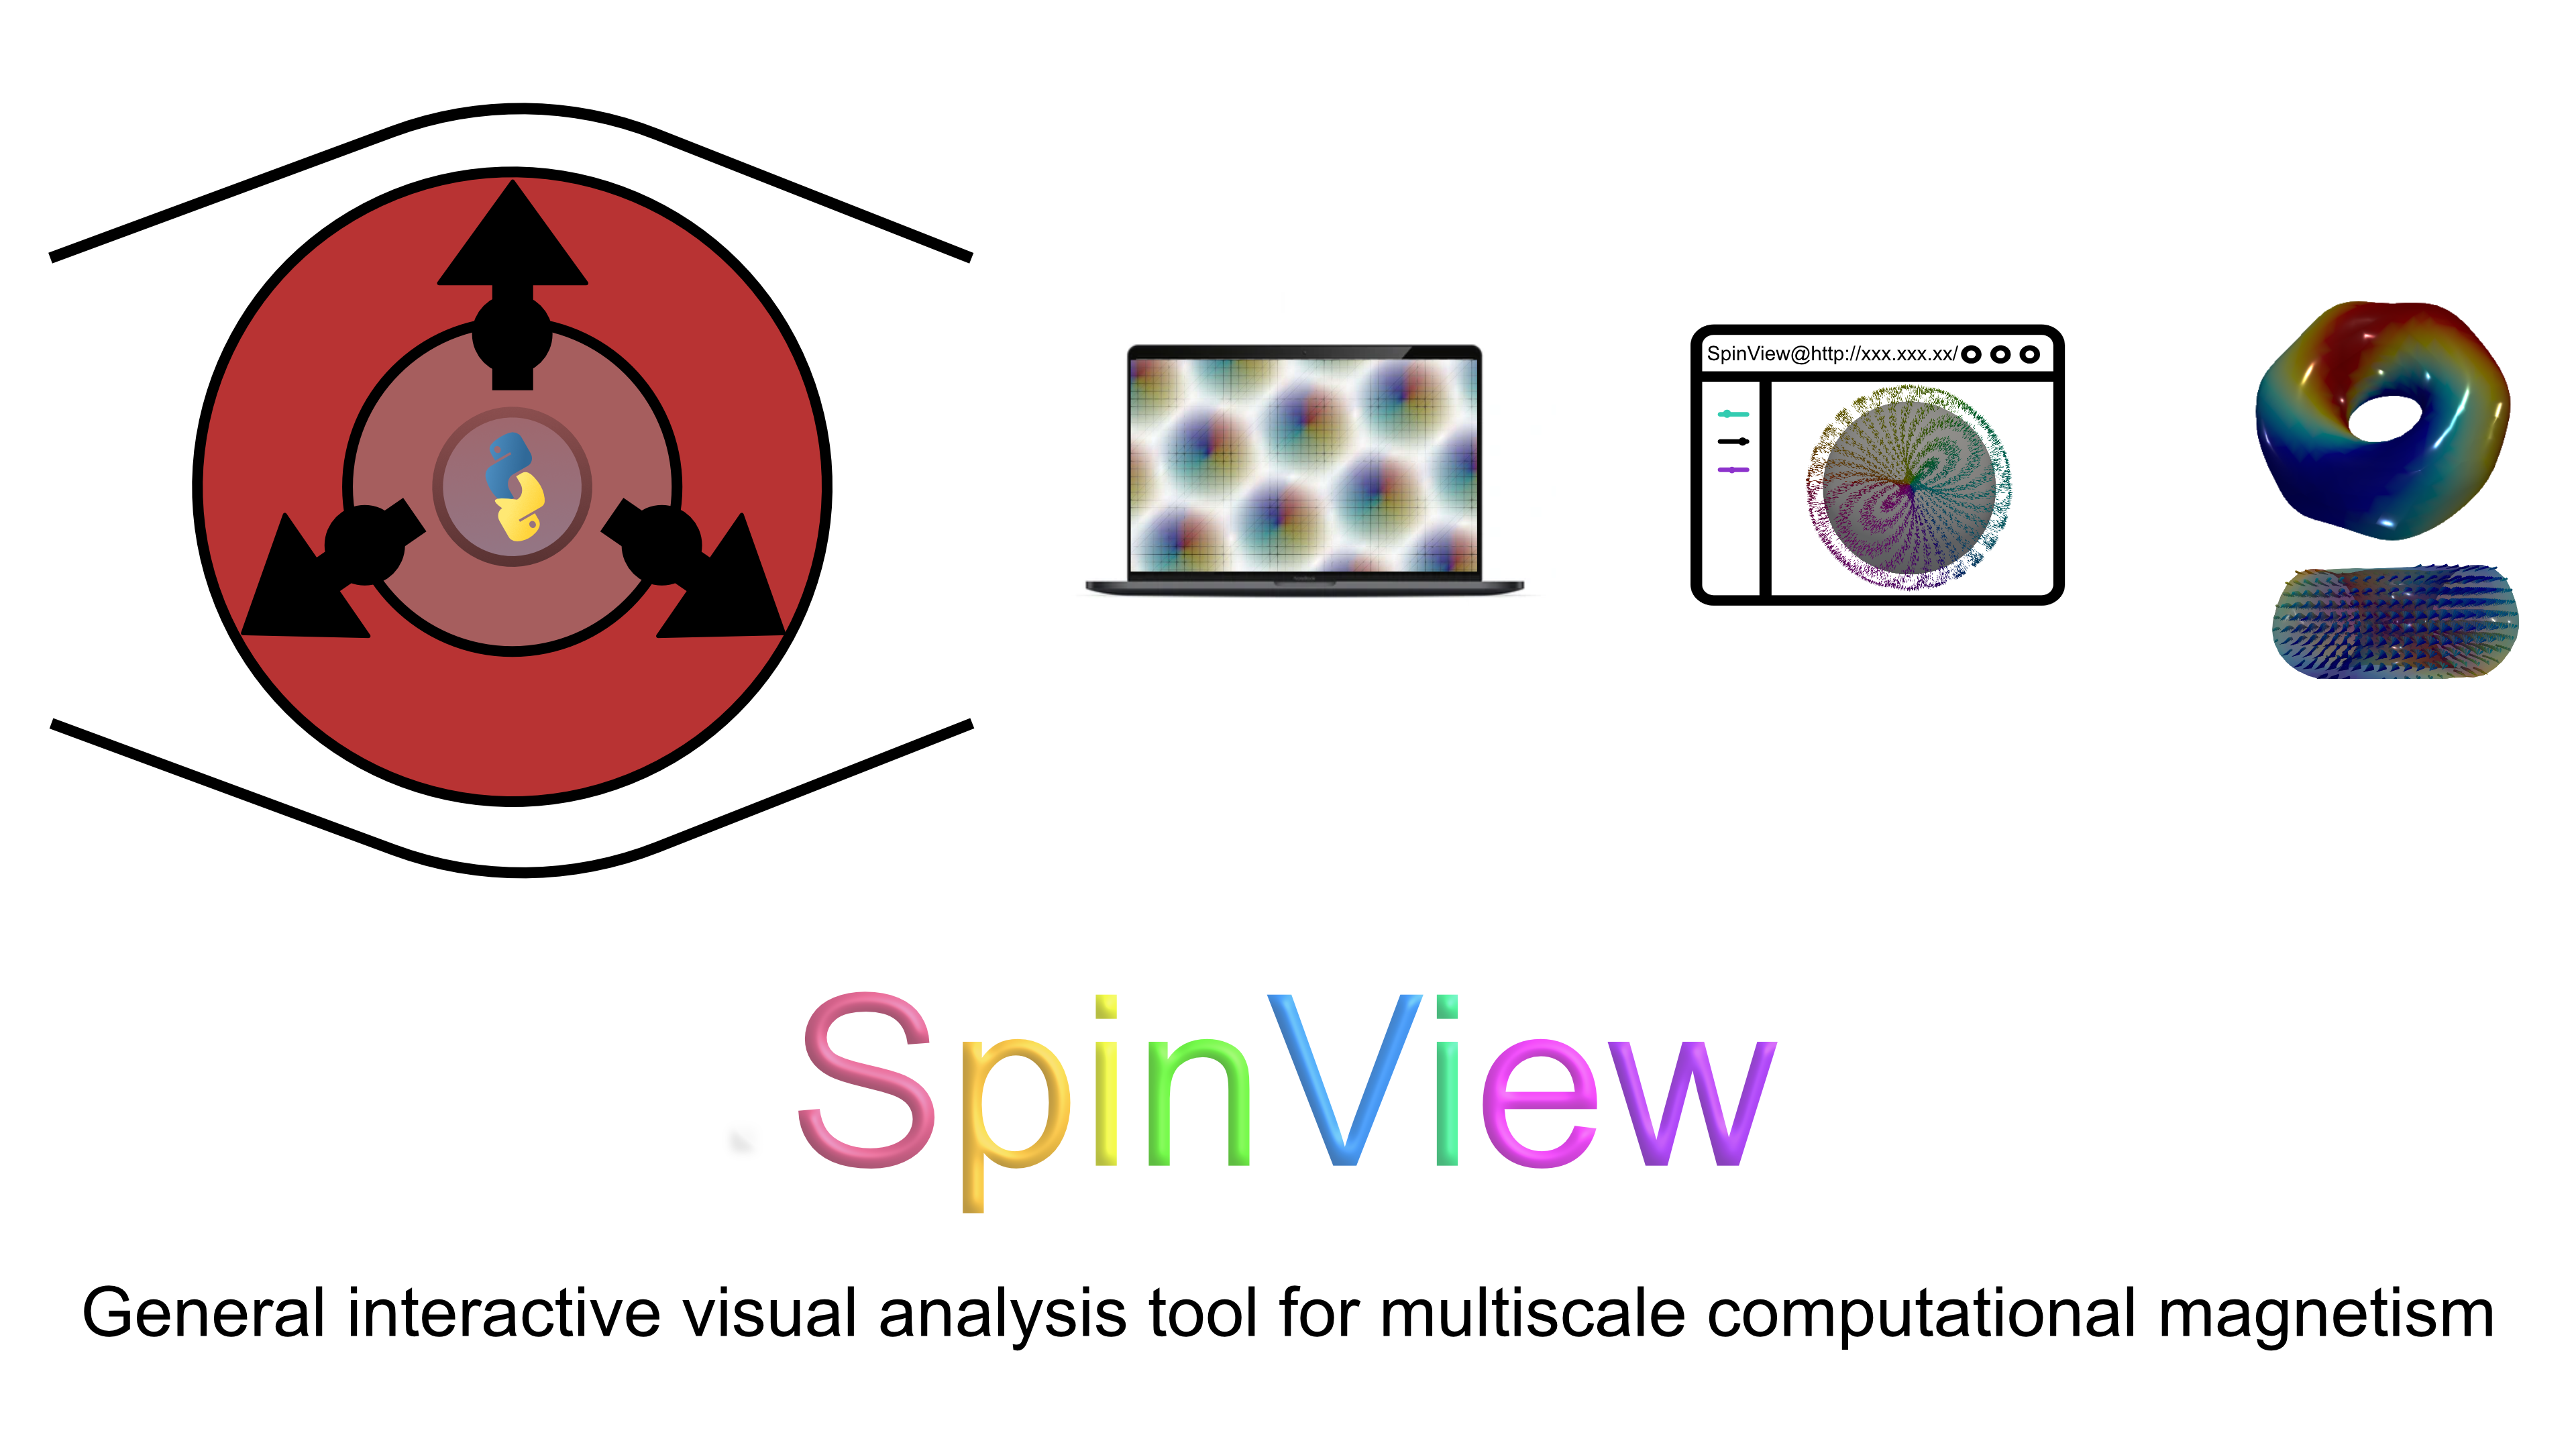 SpinView